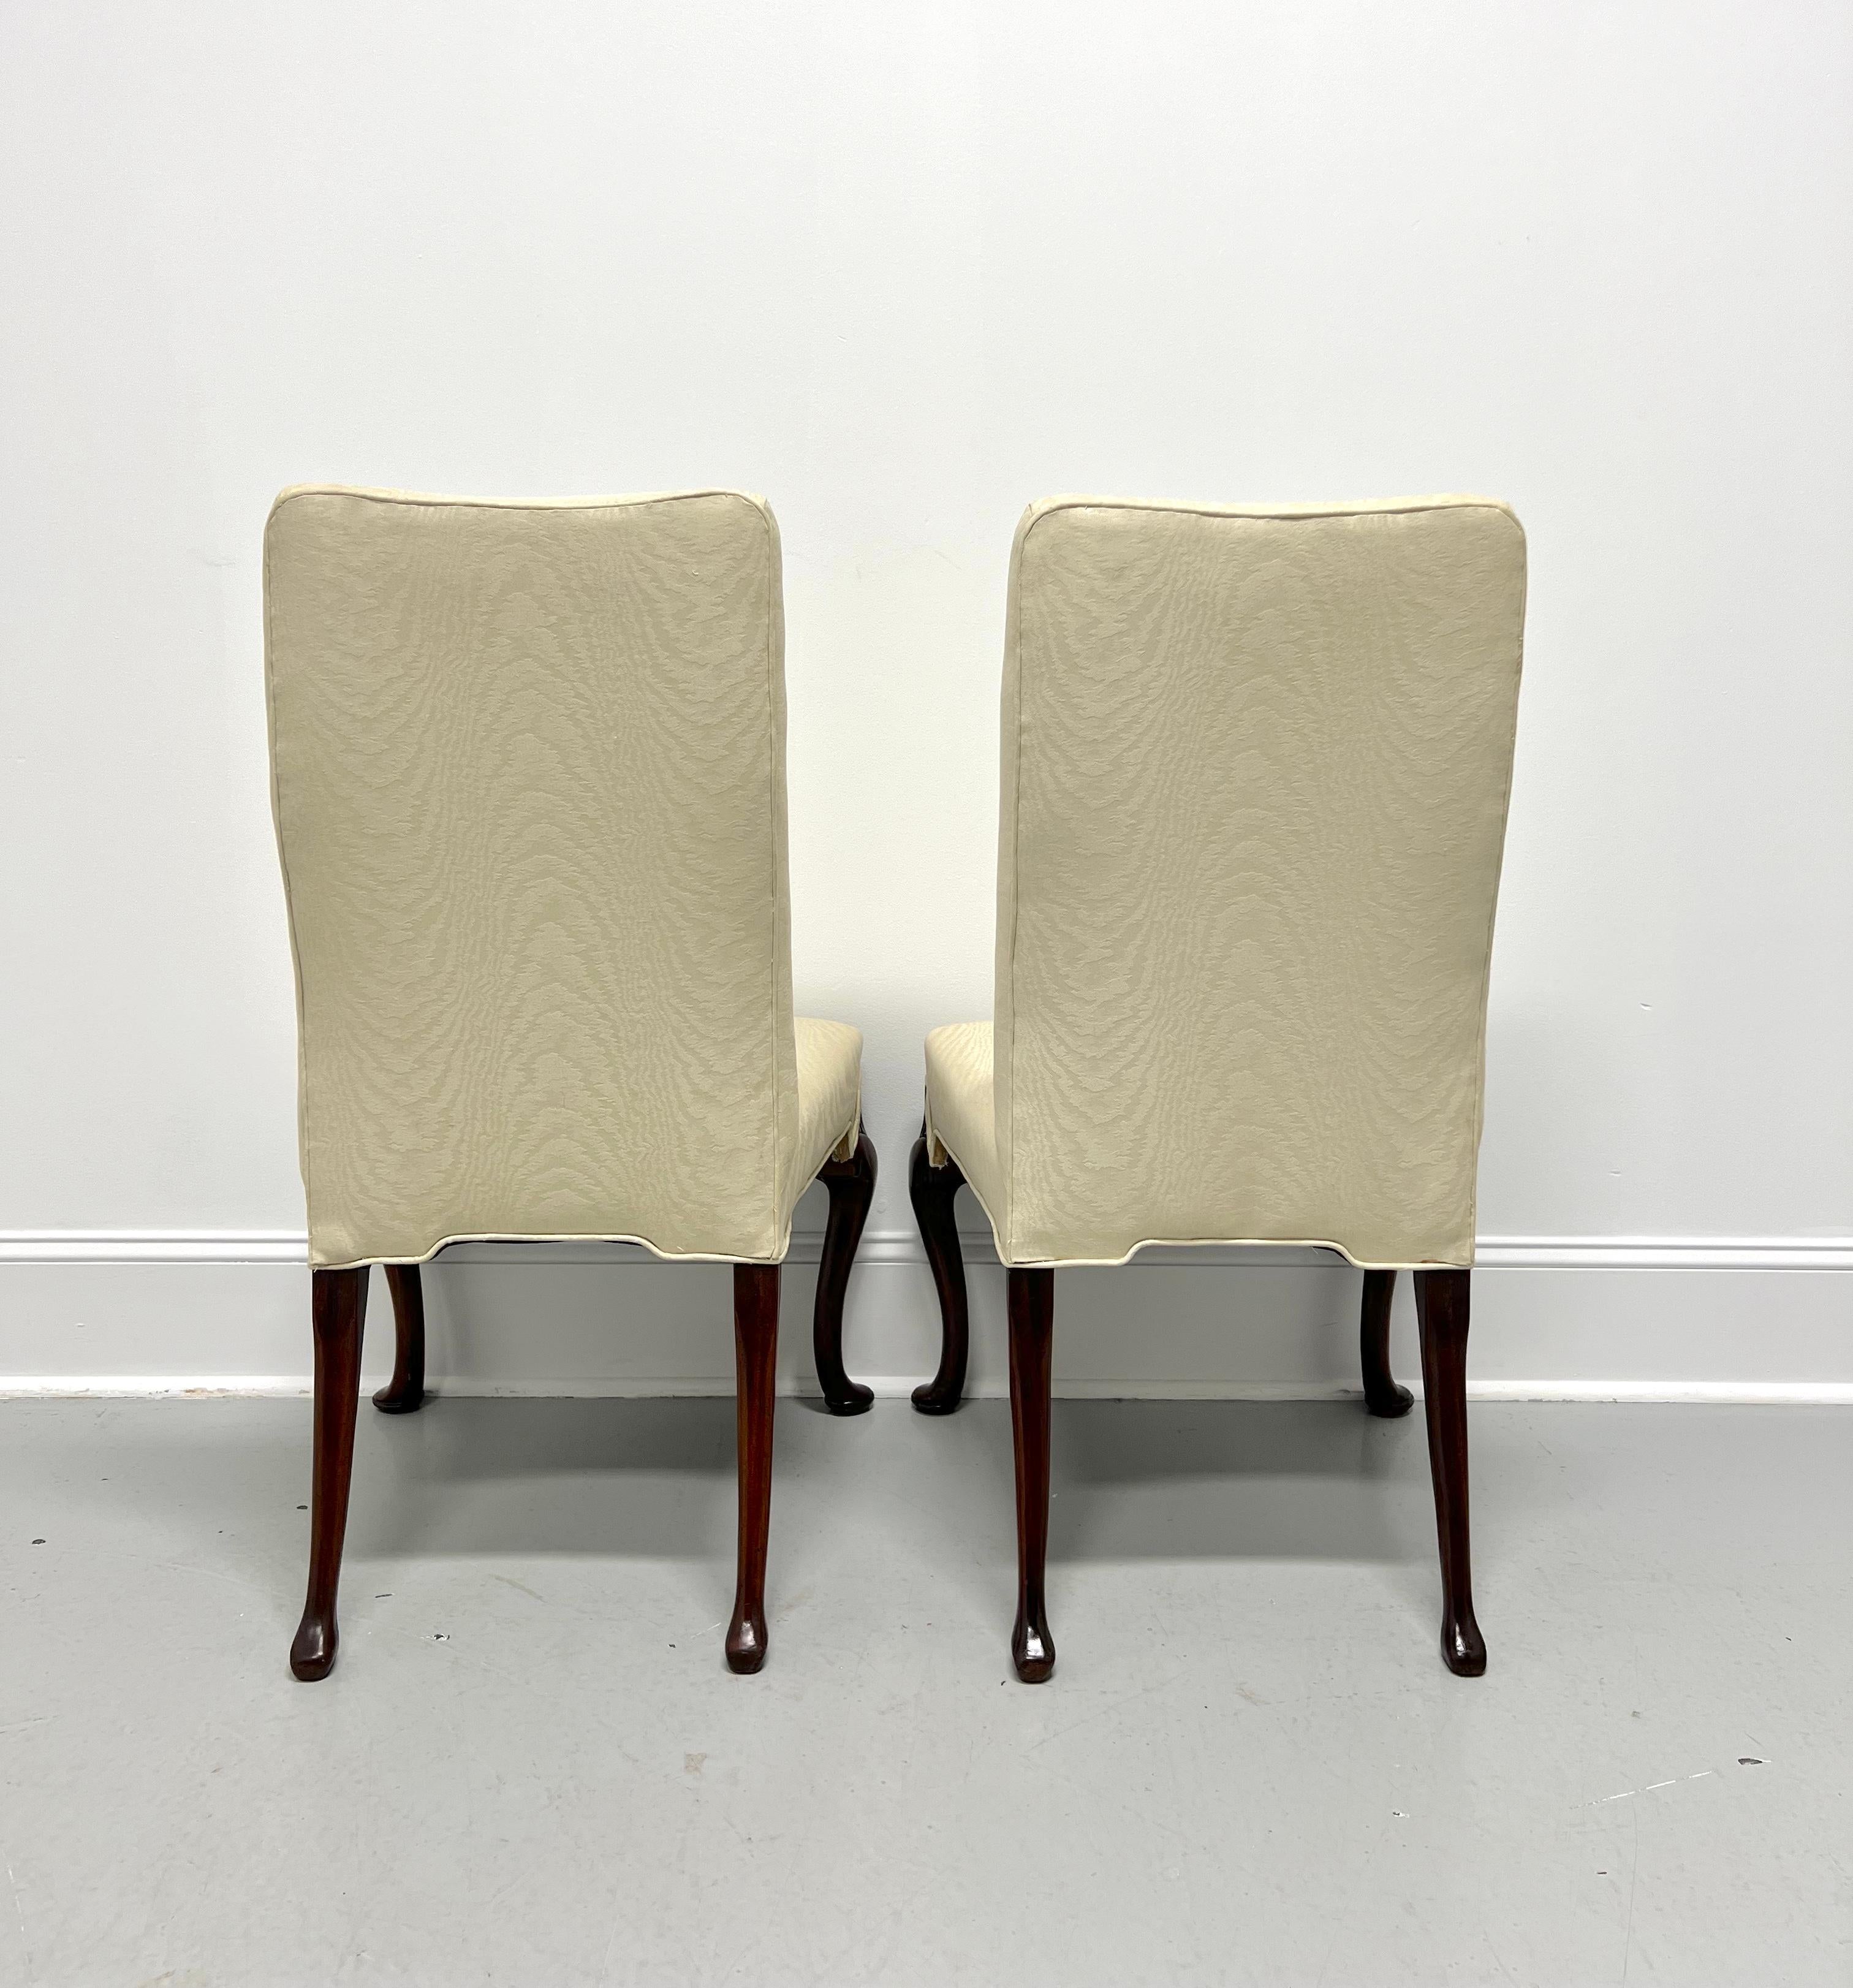 Late 20th Century Mahogany Frame French Provincial Parsons Chairs - Pair In Good Condition For Sale In Charlotte, NC